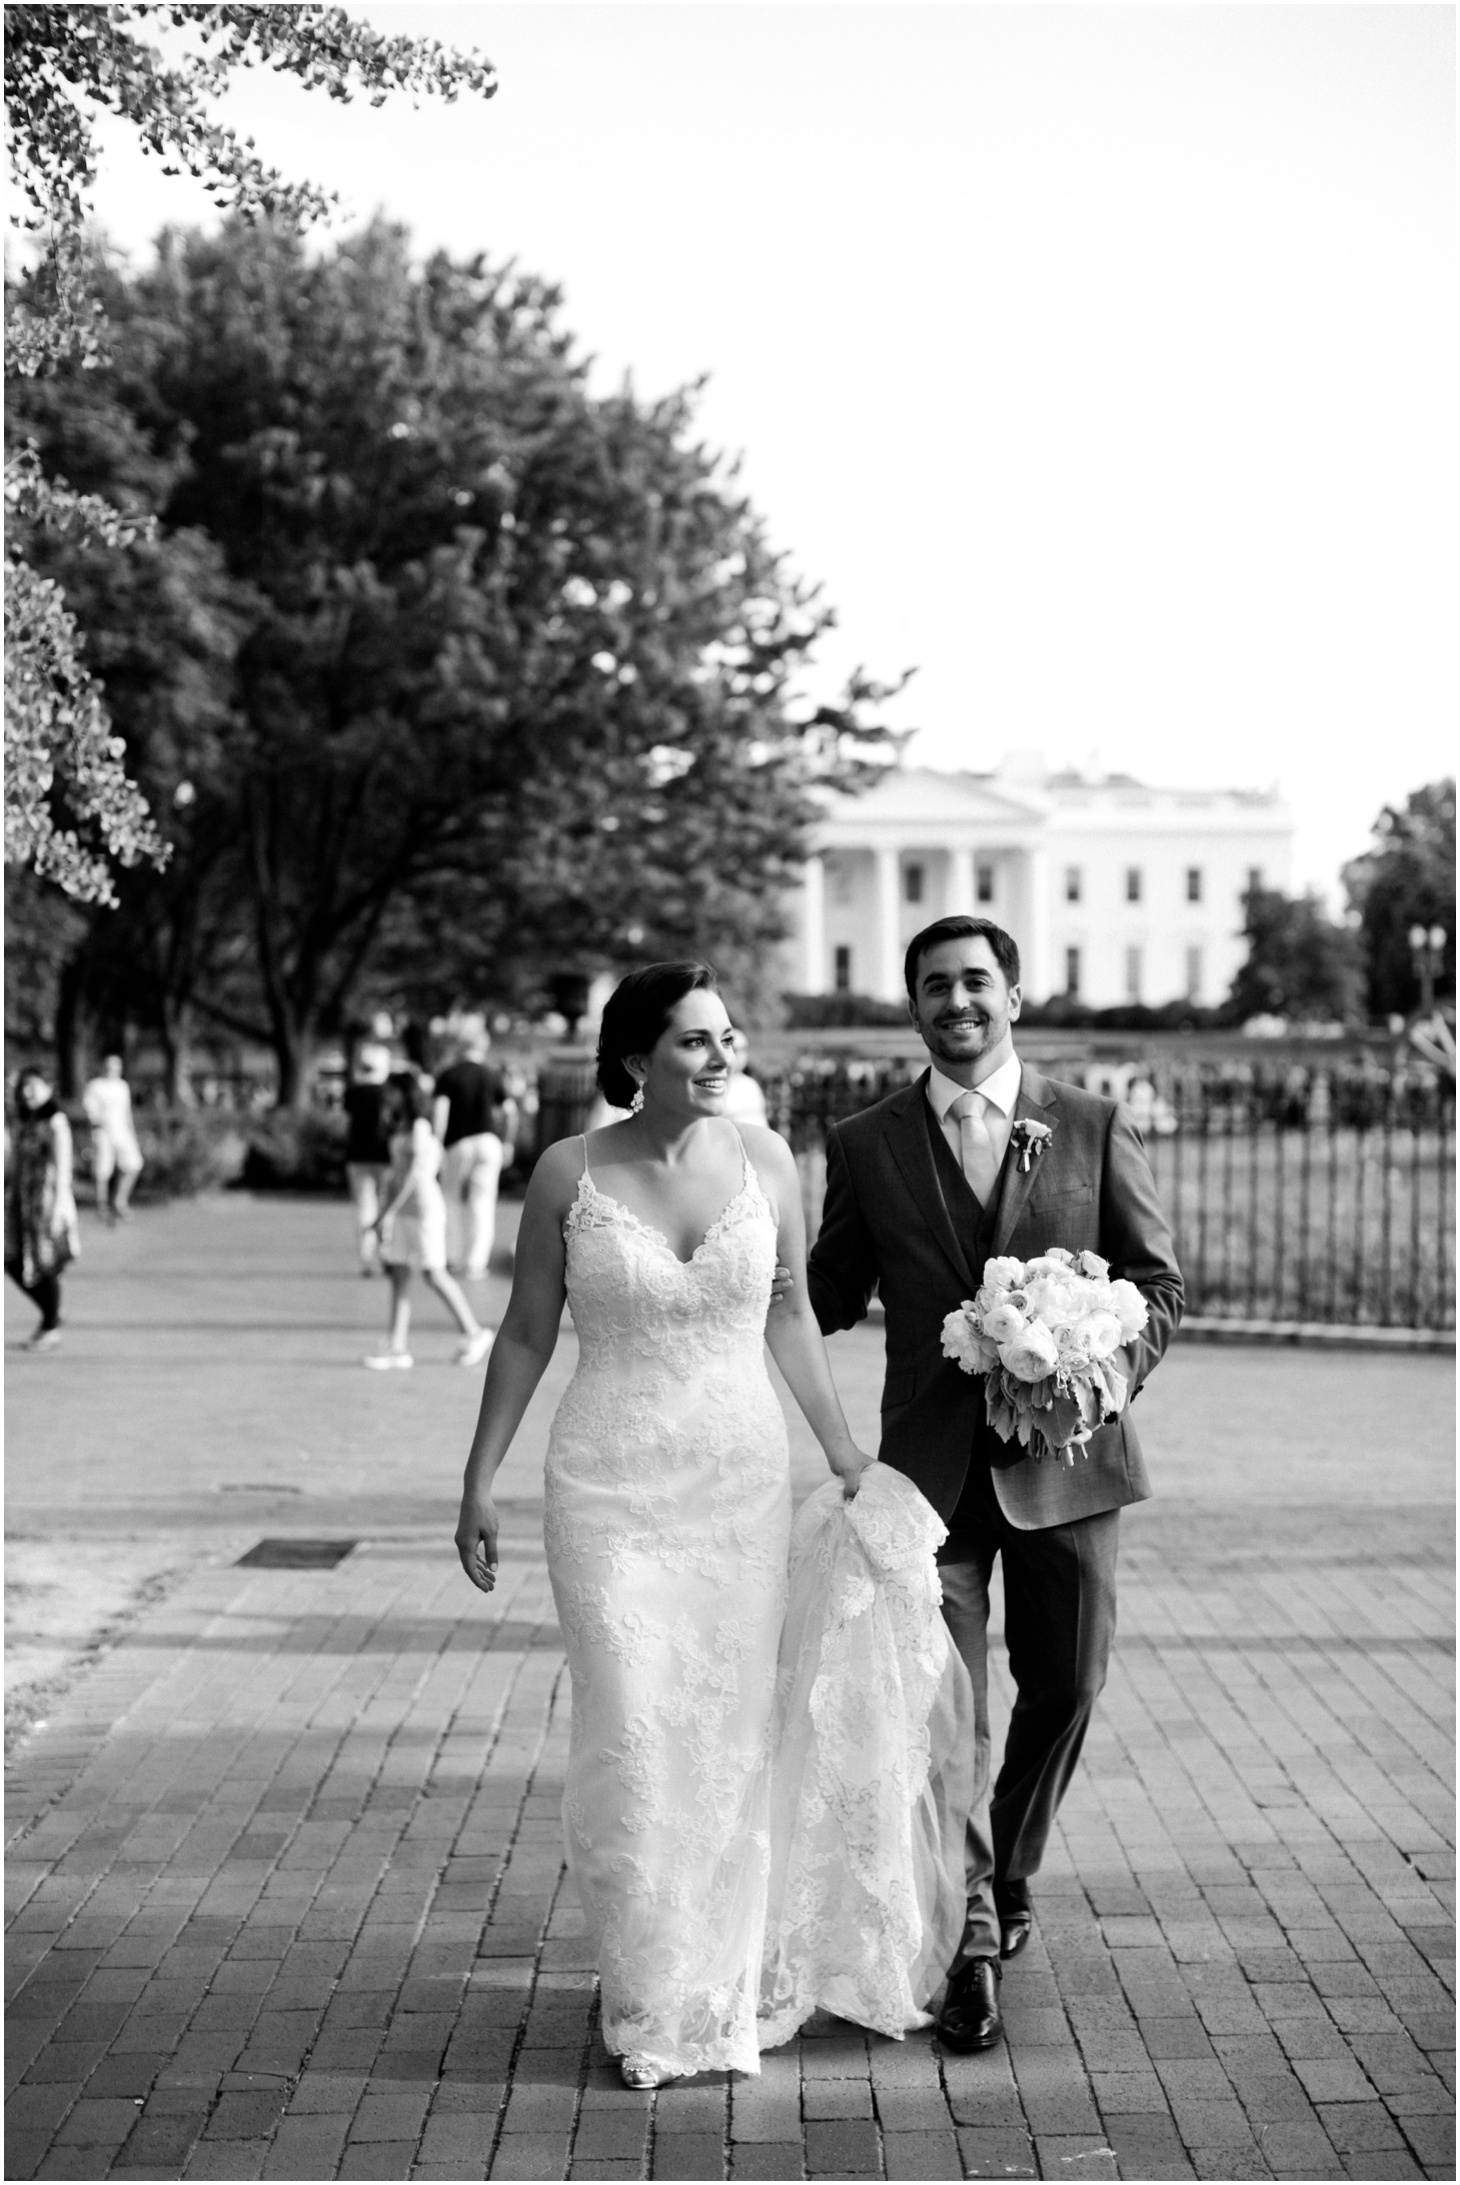 Classic DC Wedding at Old Ebbit Grill by Sarah Bradshaw Photography